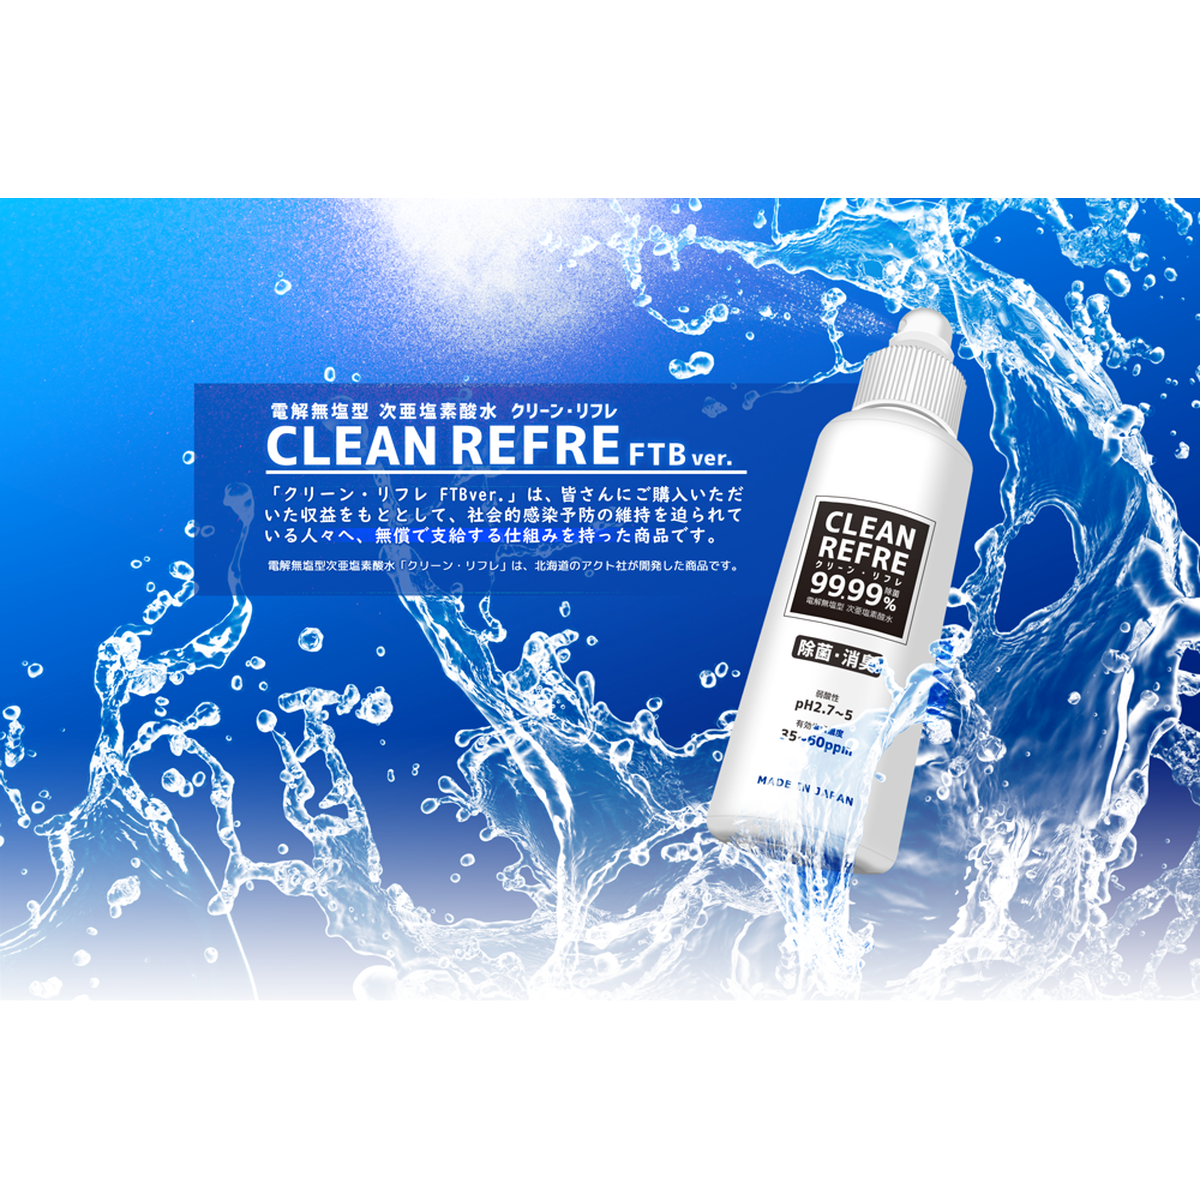 ABOUT | CLEAN REFRE クリーン・リフレ